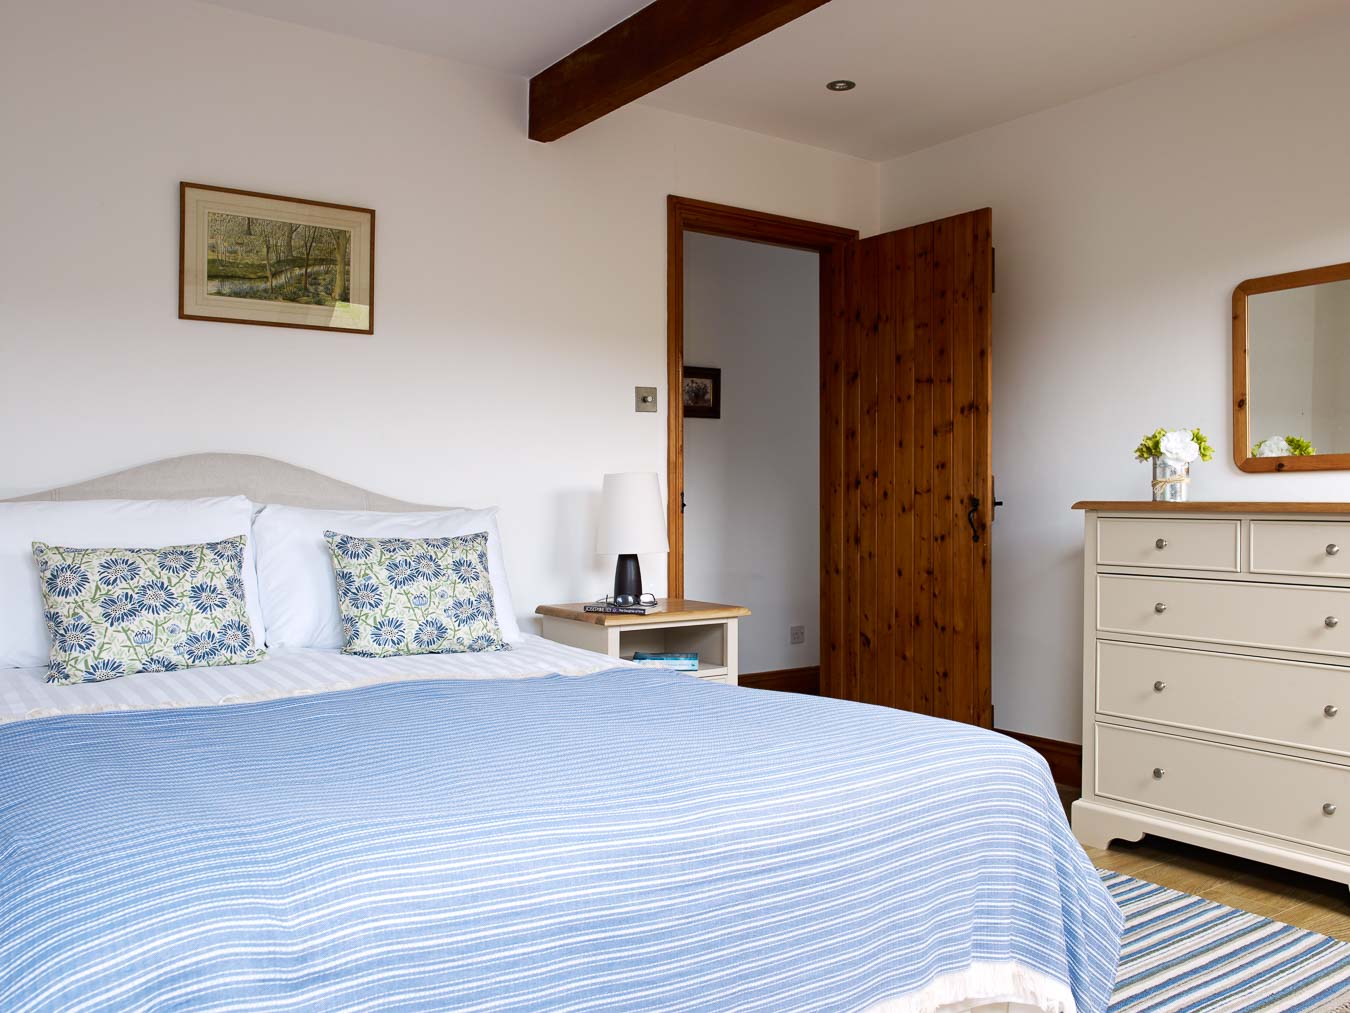 The spacious master bedroom with king size bed and matching bedroom furniture at Cartwheel cottage Flear Farm. 